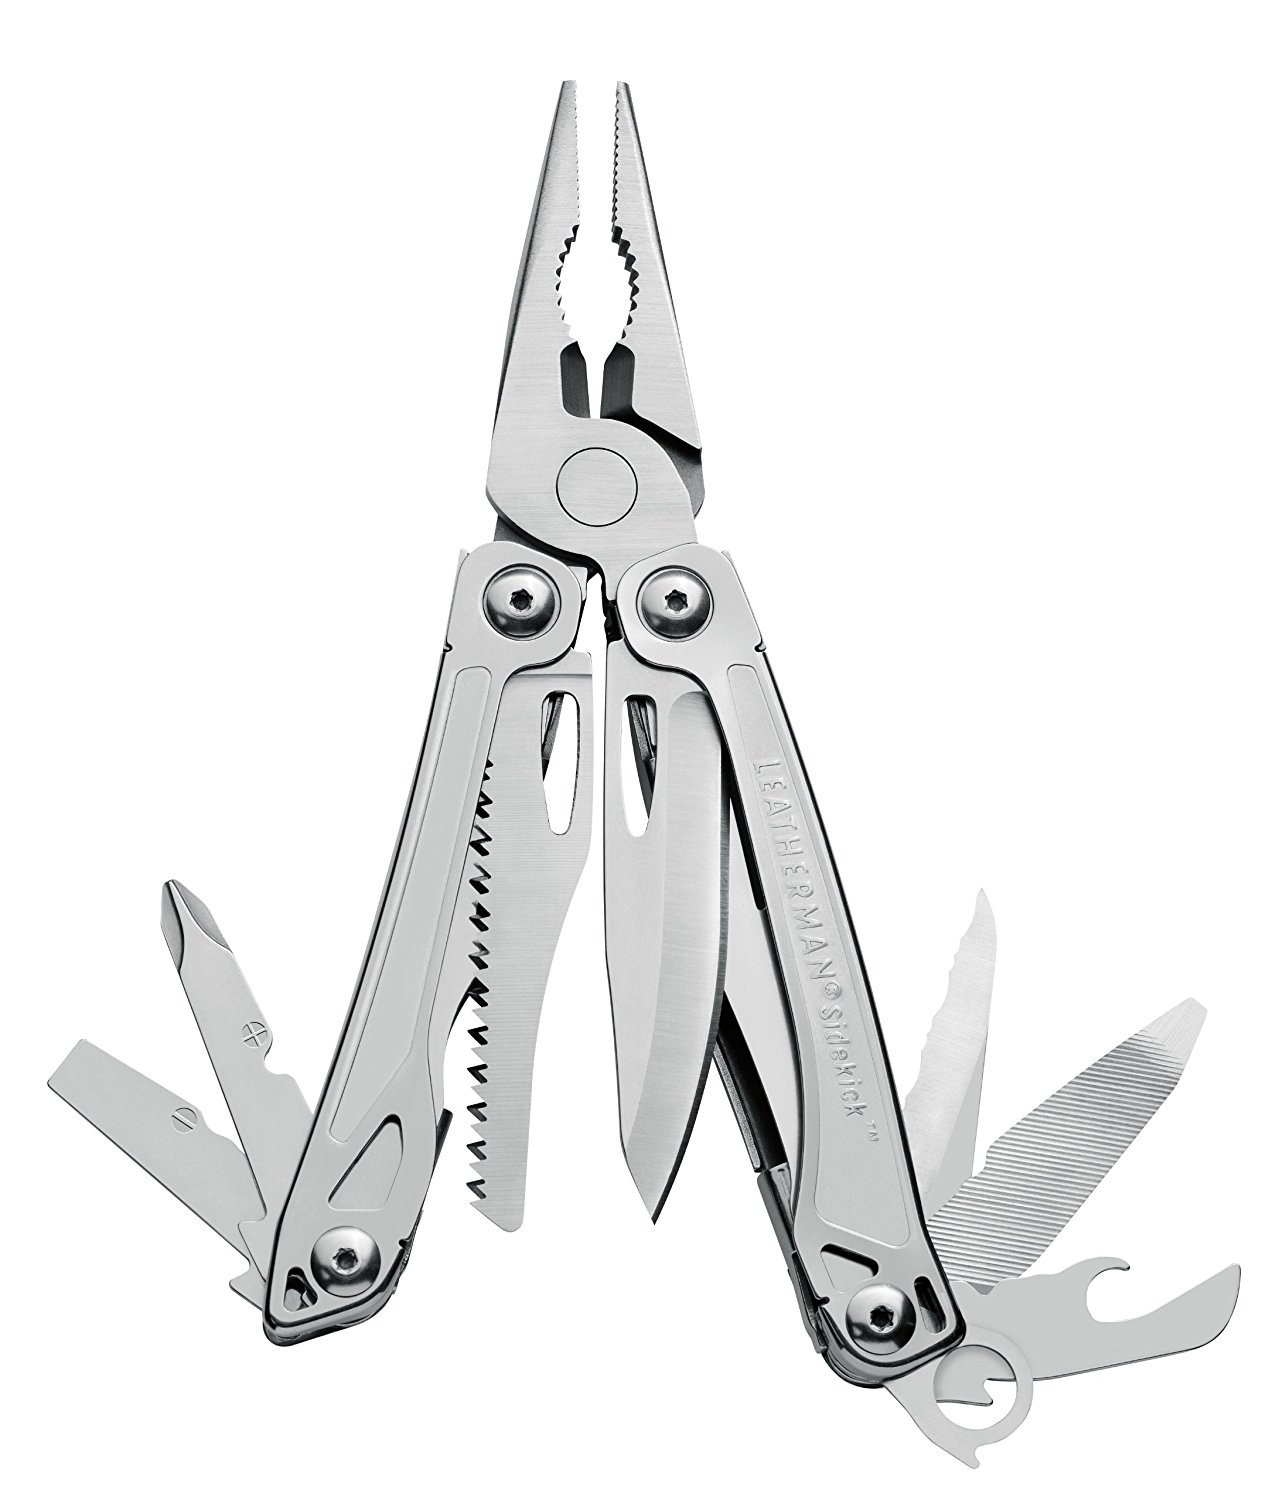 A Leatherman multitool, very useful for photographers